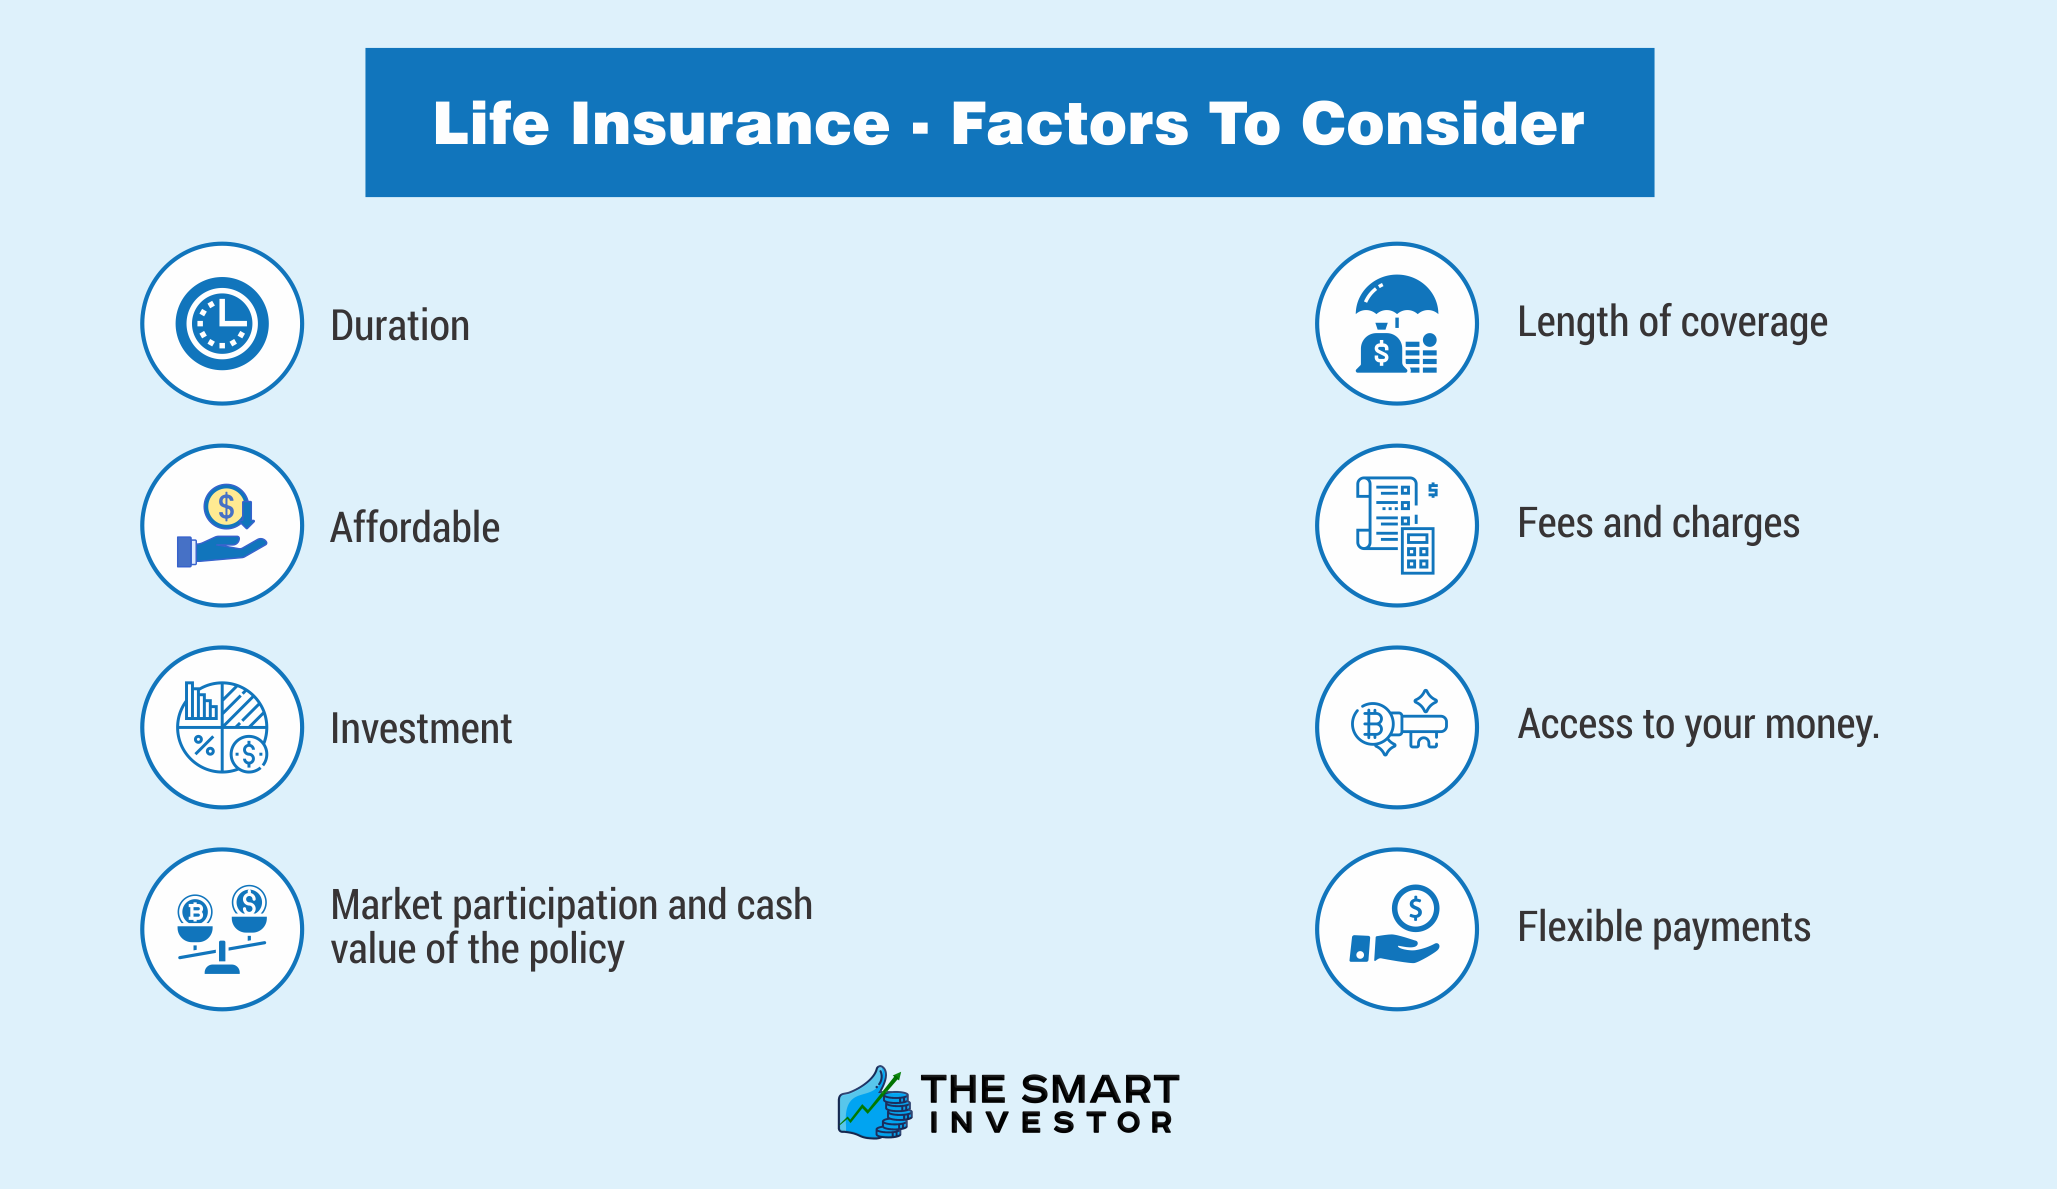 Life Insurance - Factors To Consider